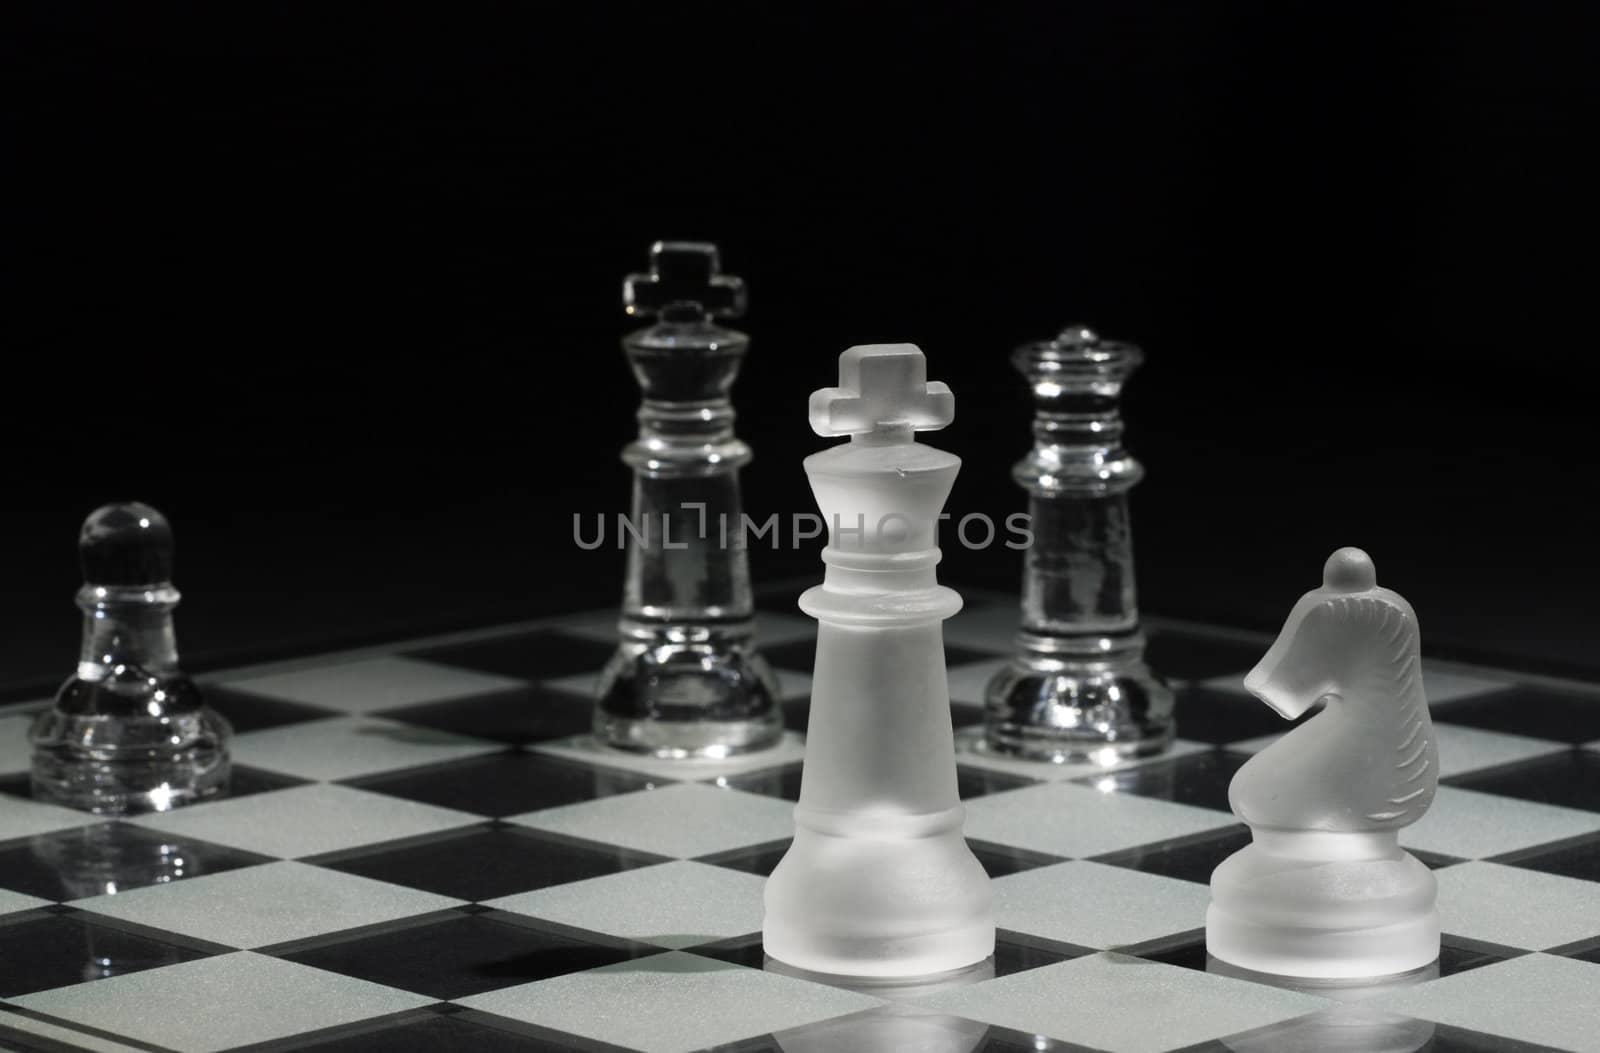 Kings facing each other with one with selective focus and the other in the background, Queen and Knight on the board